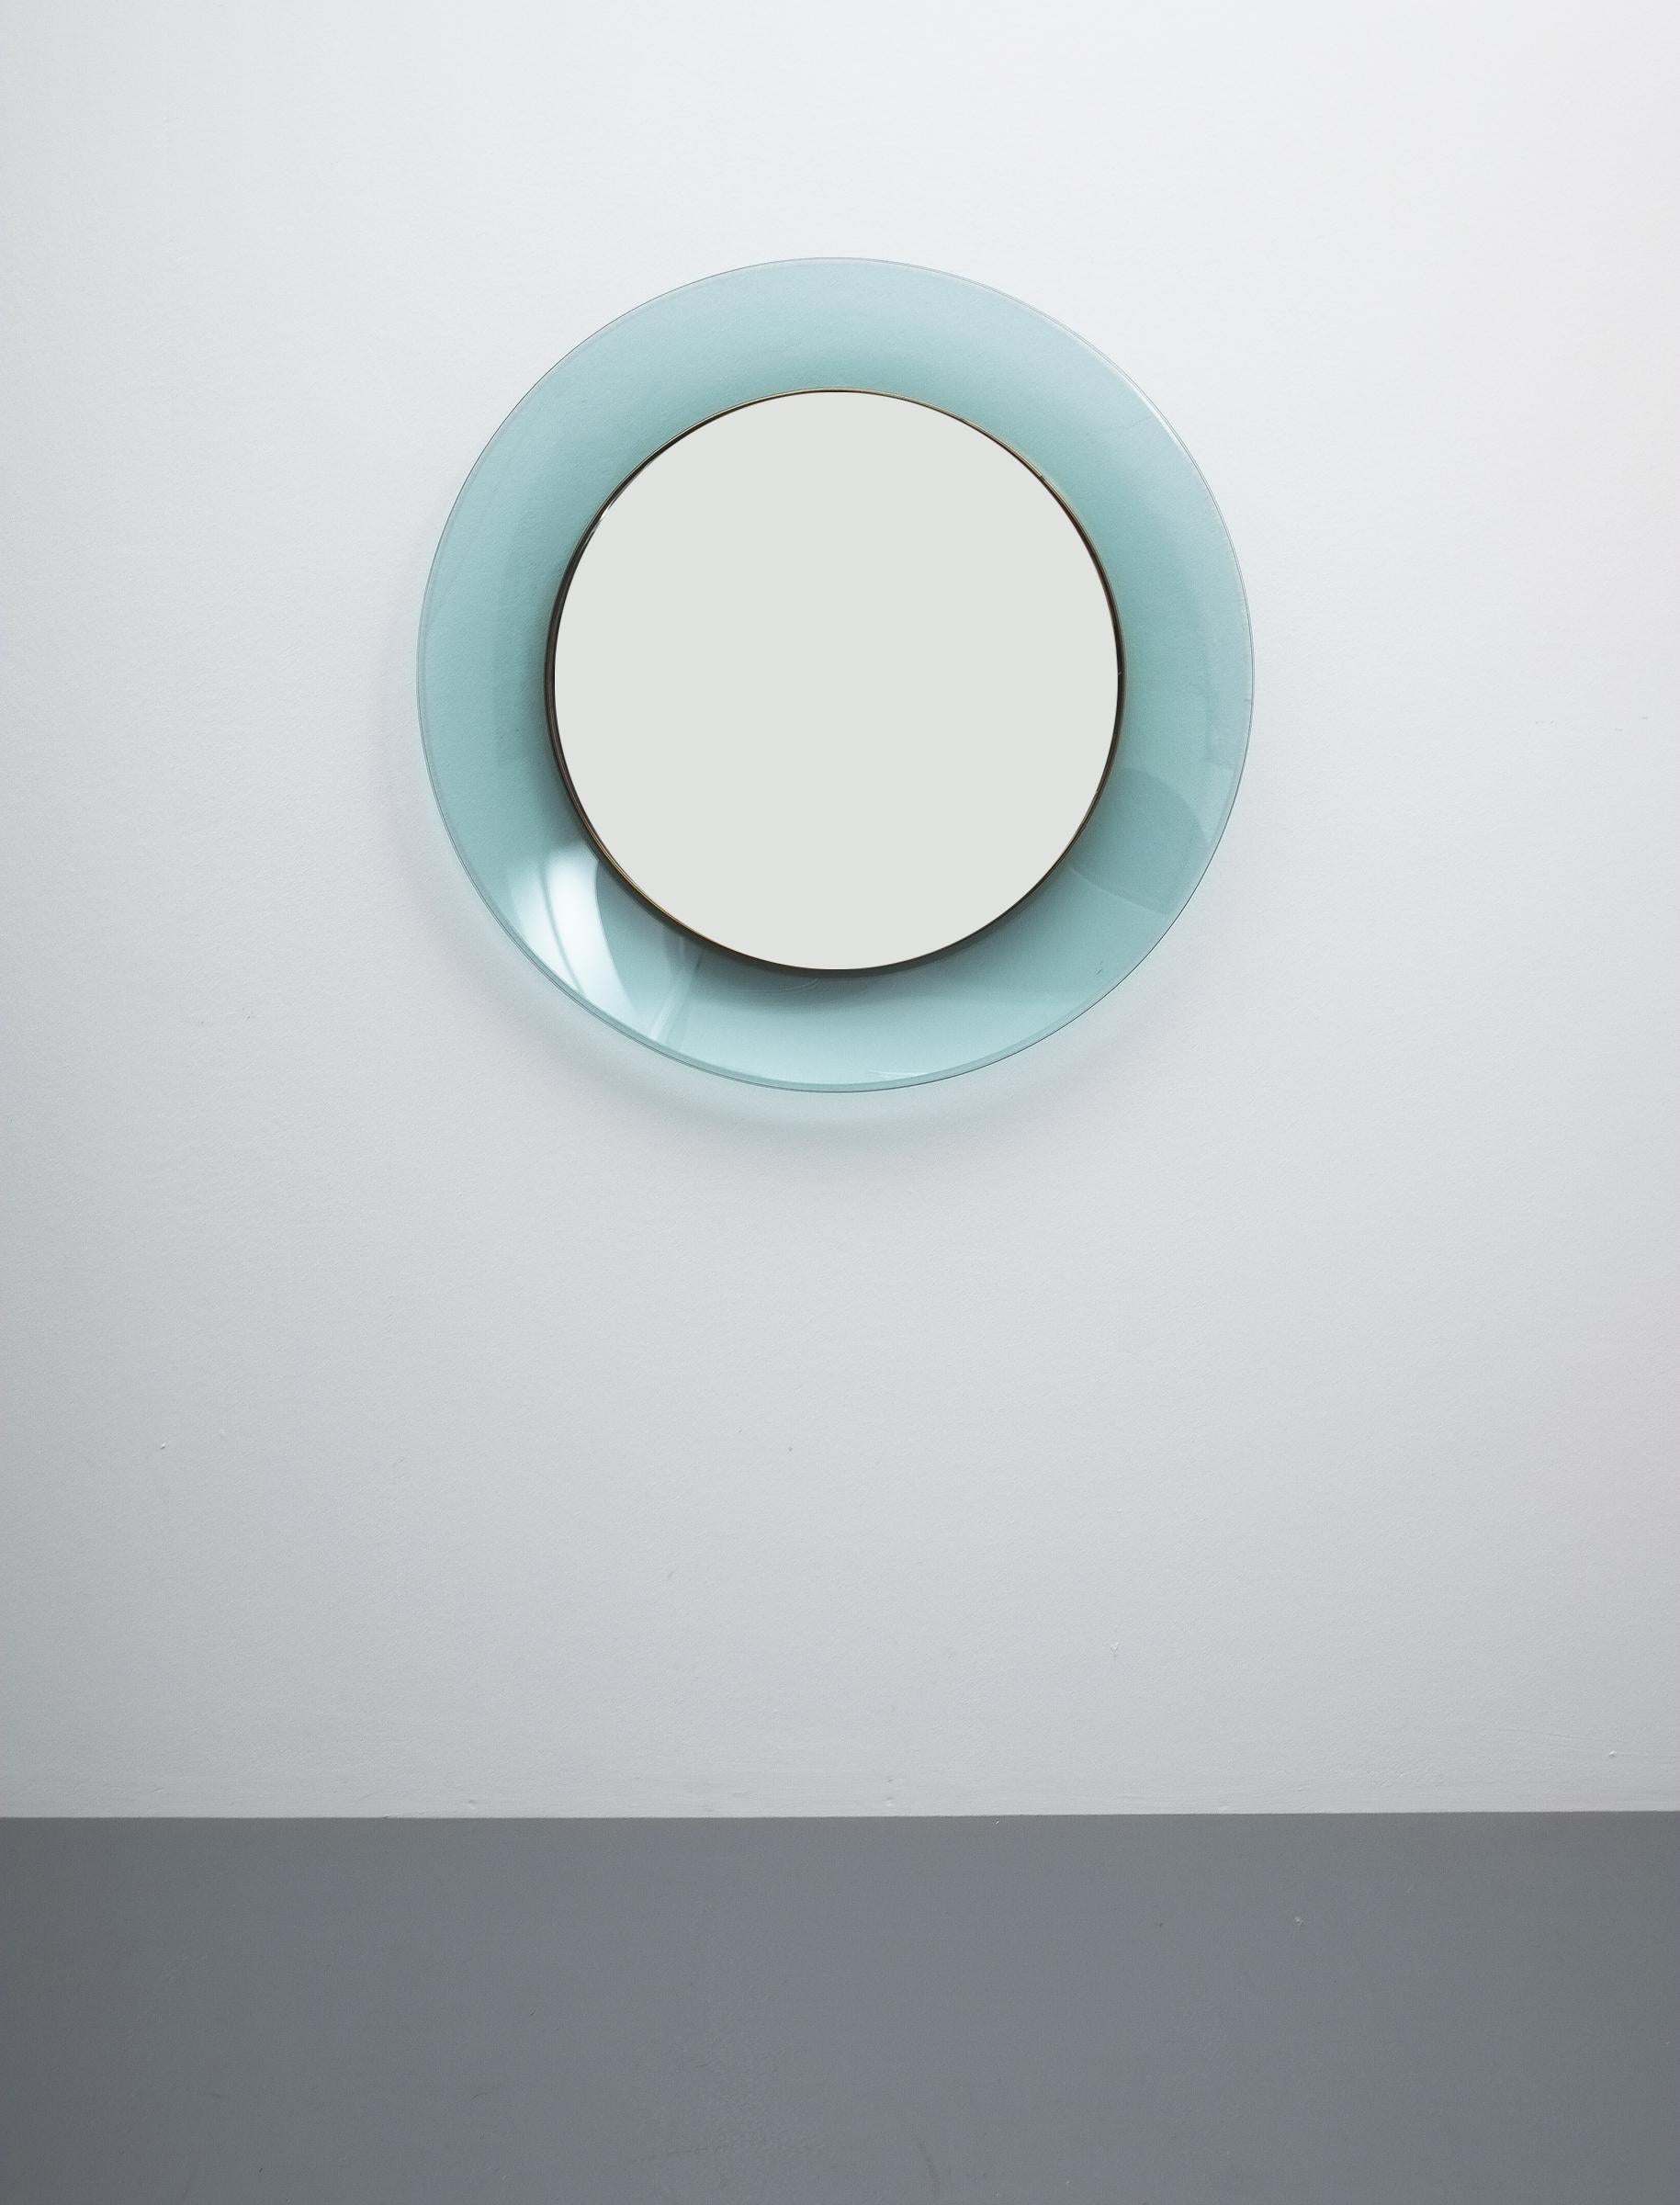 Max Ingrand round blue mirror Fontana Arte Model 1699, Italy, circa 1968. Elegant light blue-turquoise curved and beveled glass framing mirrored glass encased in brass trim. Dated on the back '1968'. Very good condition with no chips.
Measures: